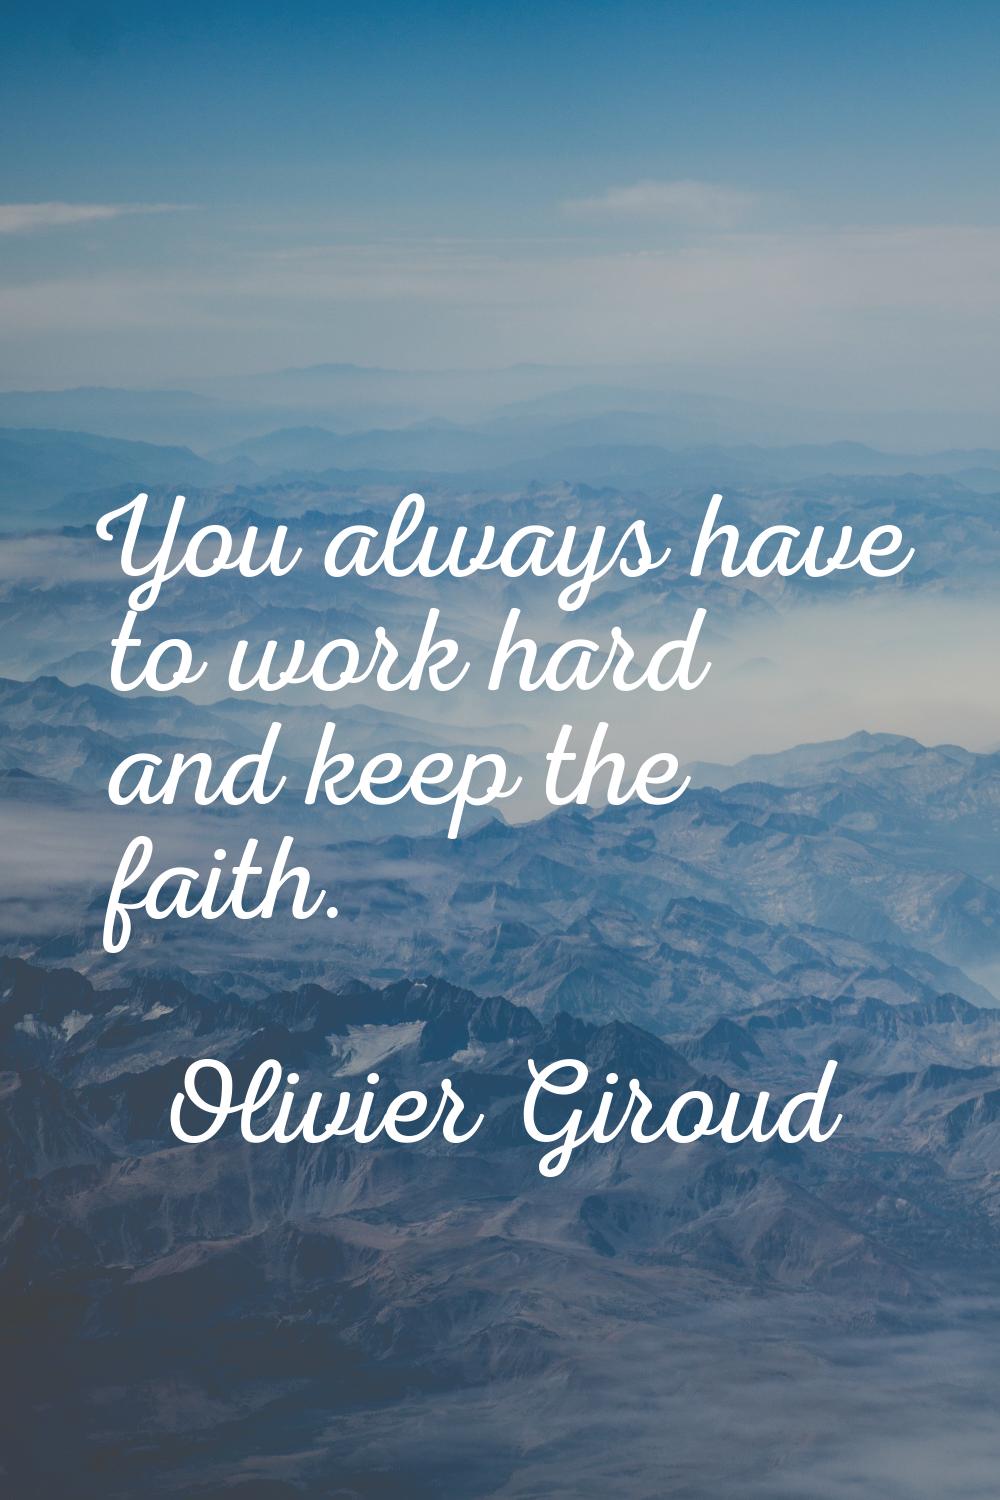 You always have to work hard and keep the faith.